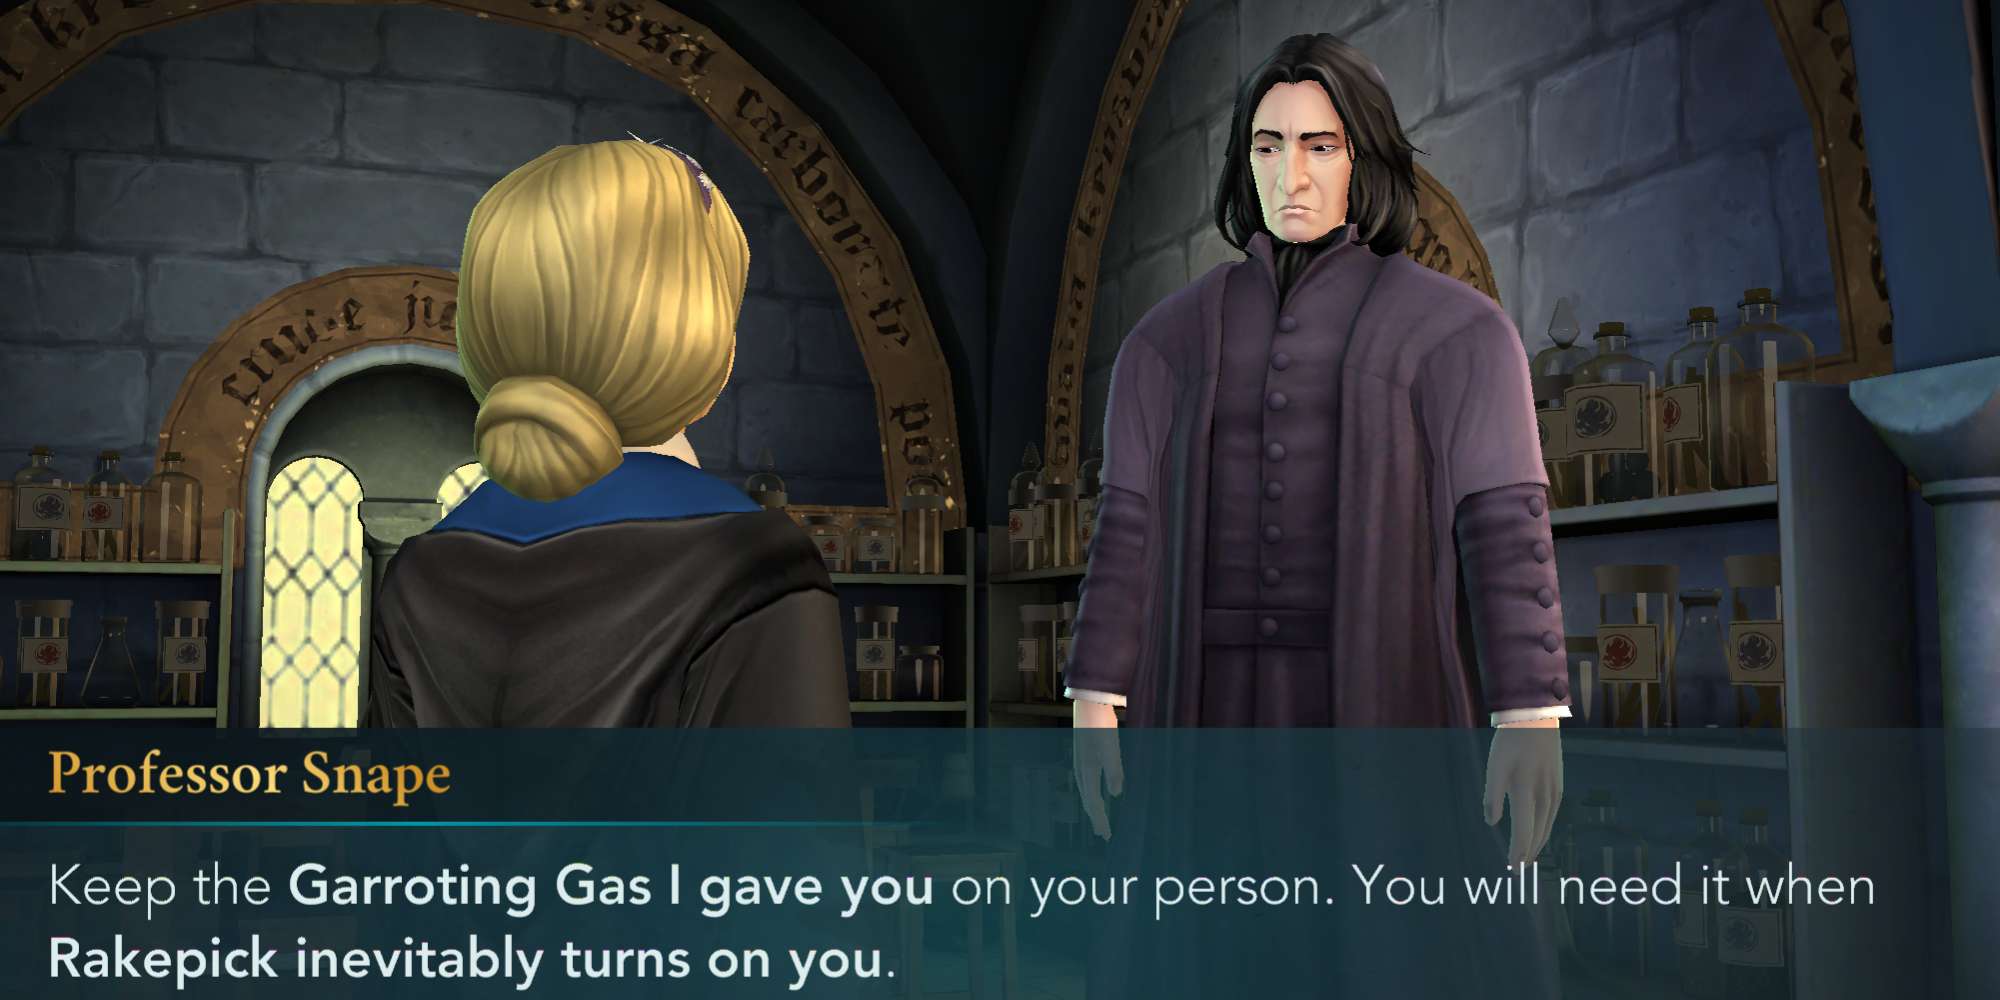 Snape gives a Garrotting Gas potion to a student